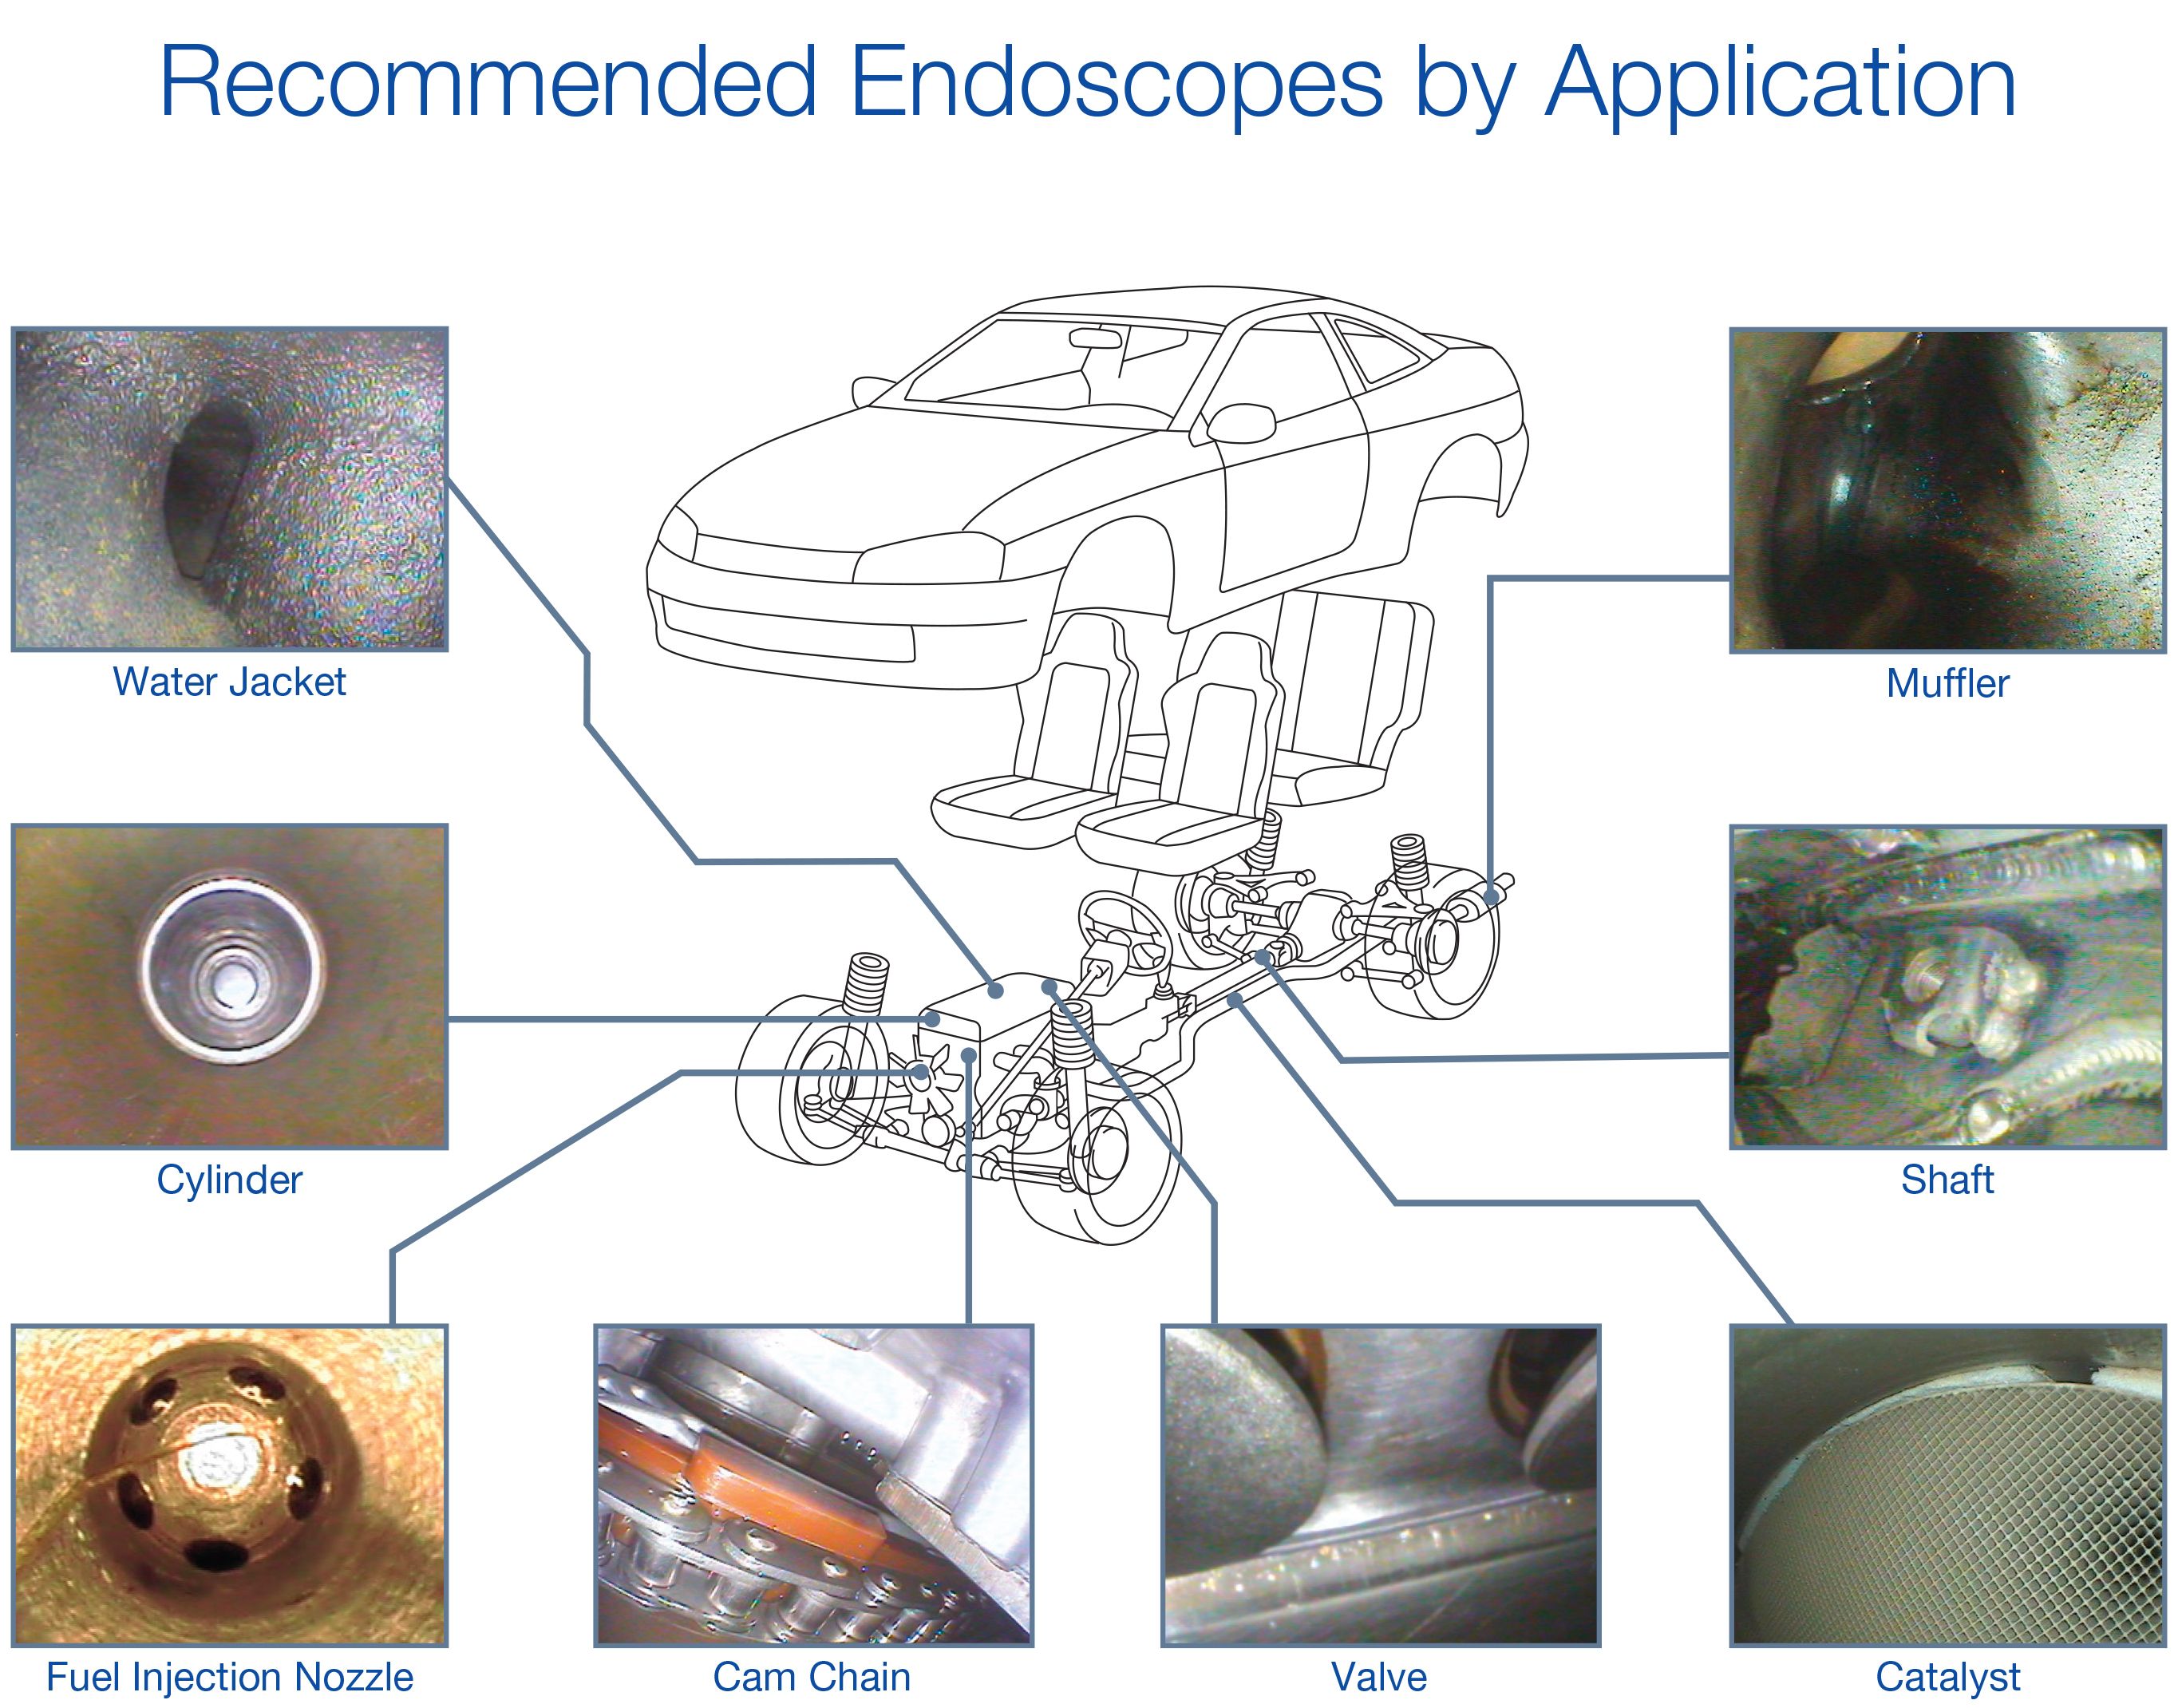 Recommended Endoscopes by Application